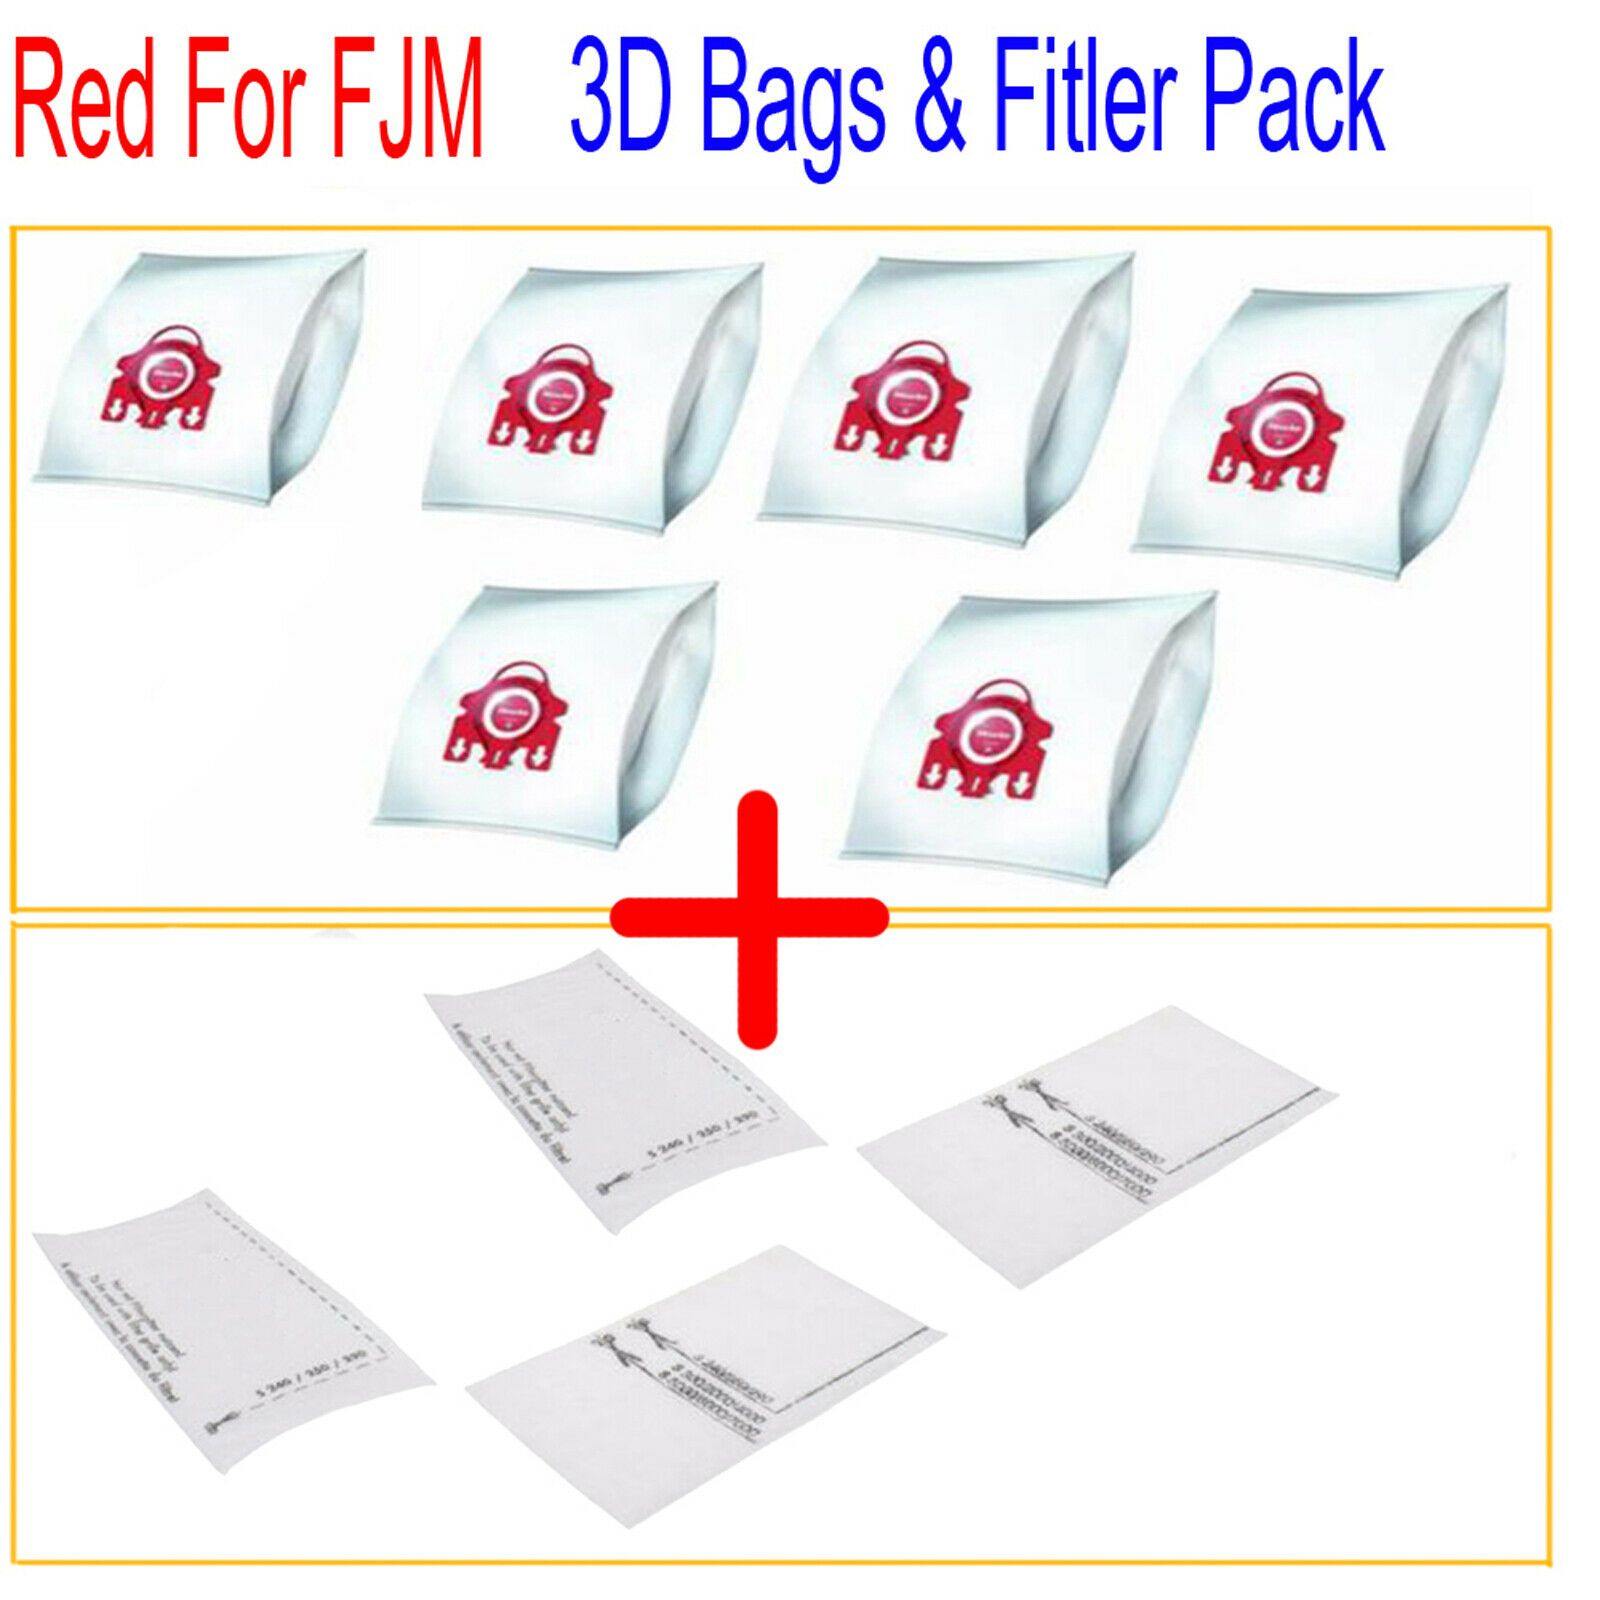 6x Vacuum Cleaner Bags For Miele FJM Red 3D COMPACT C1 C2 S4 S6 Hyclean Sparesbarn